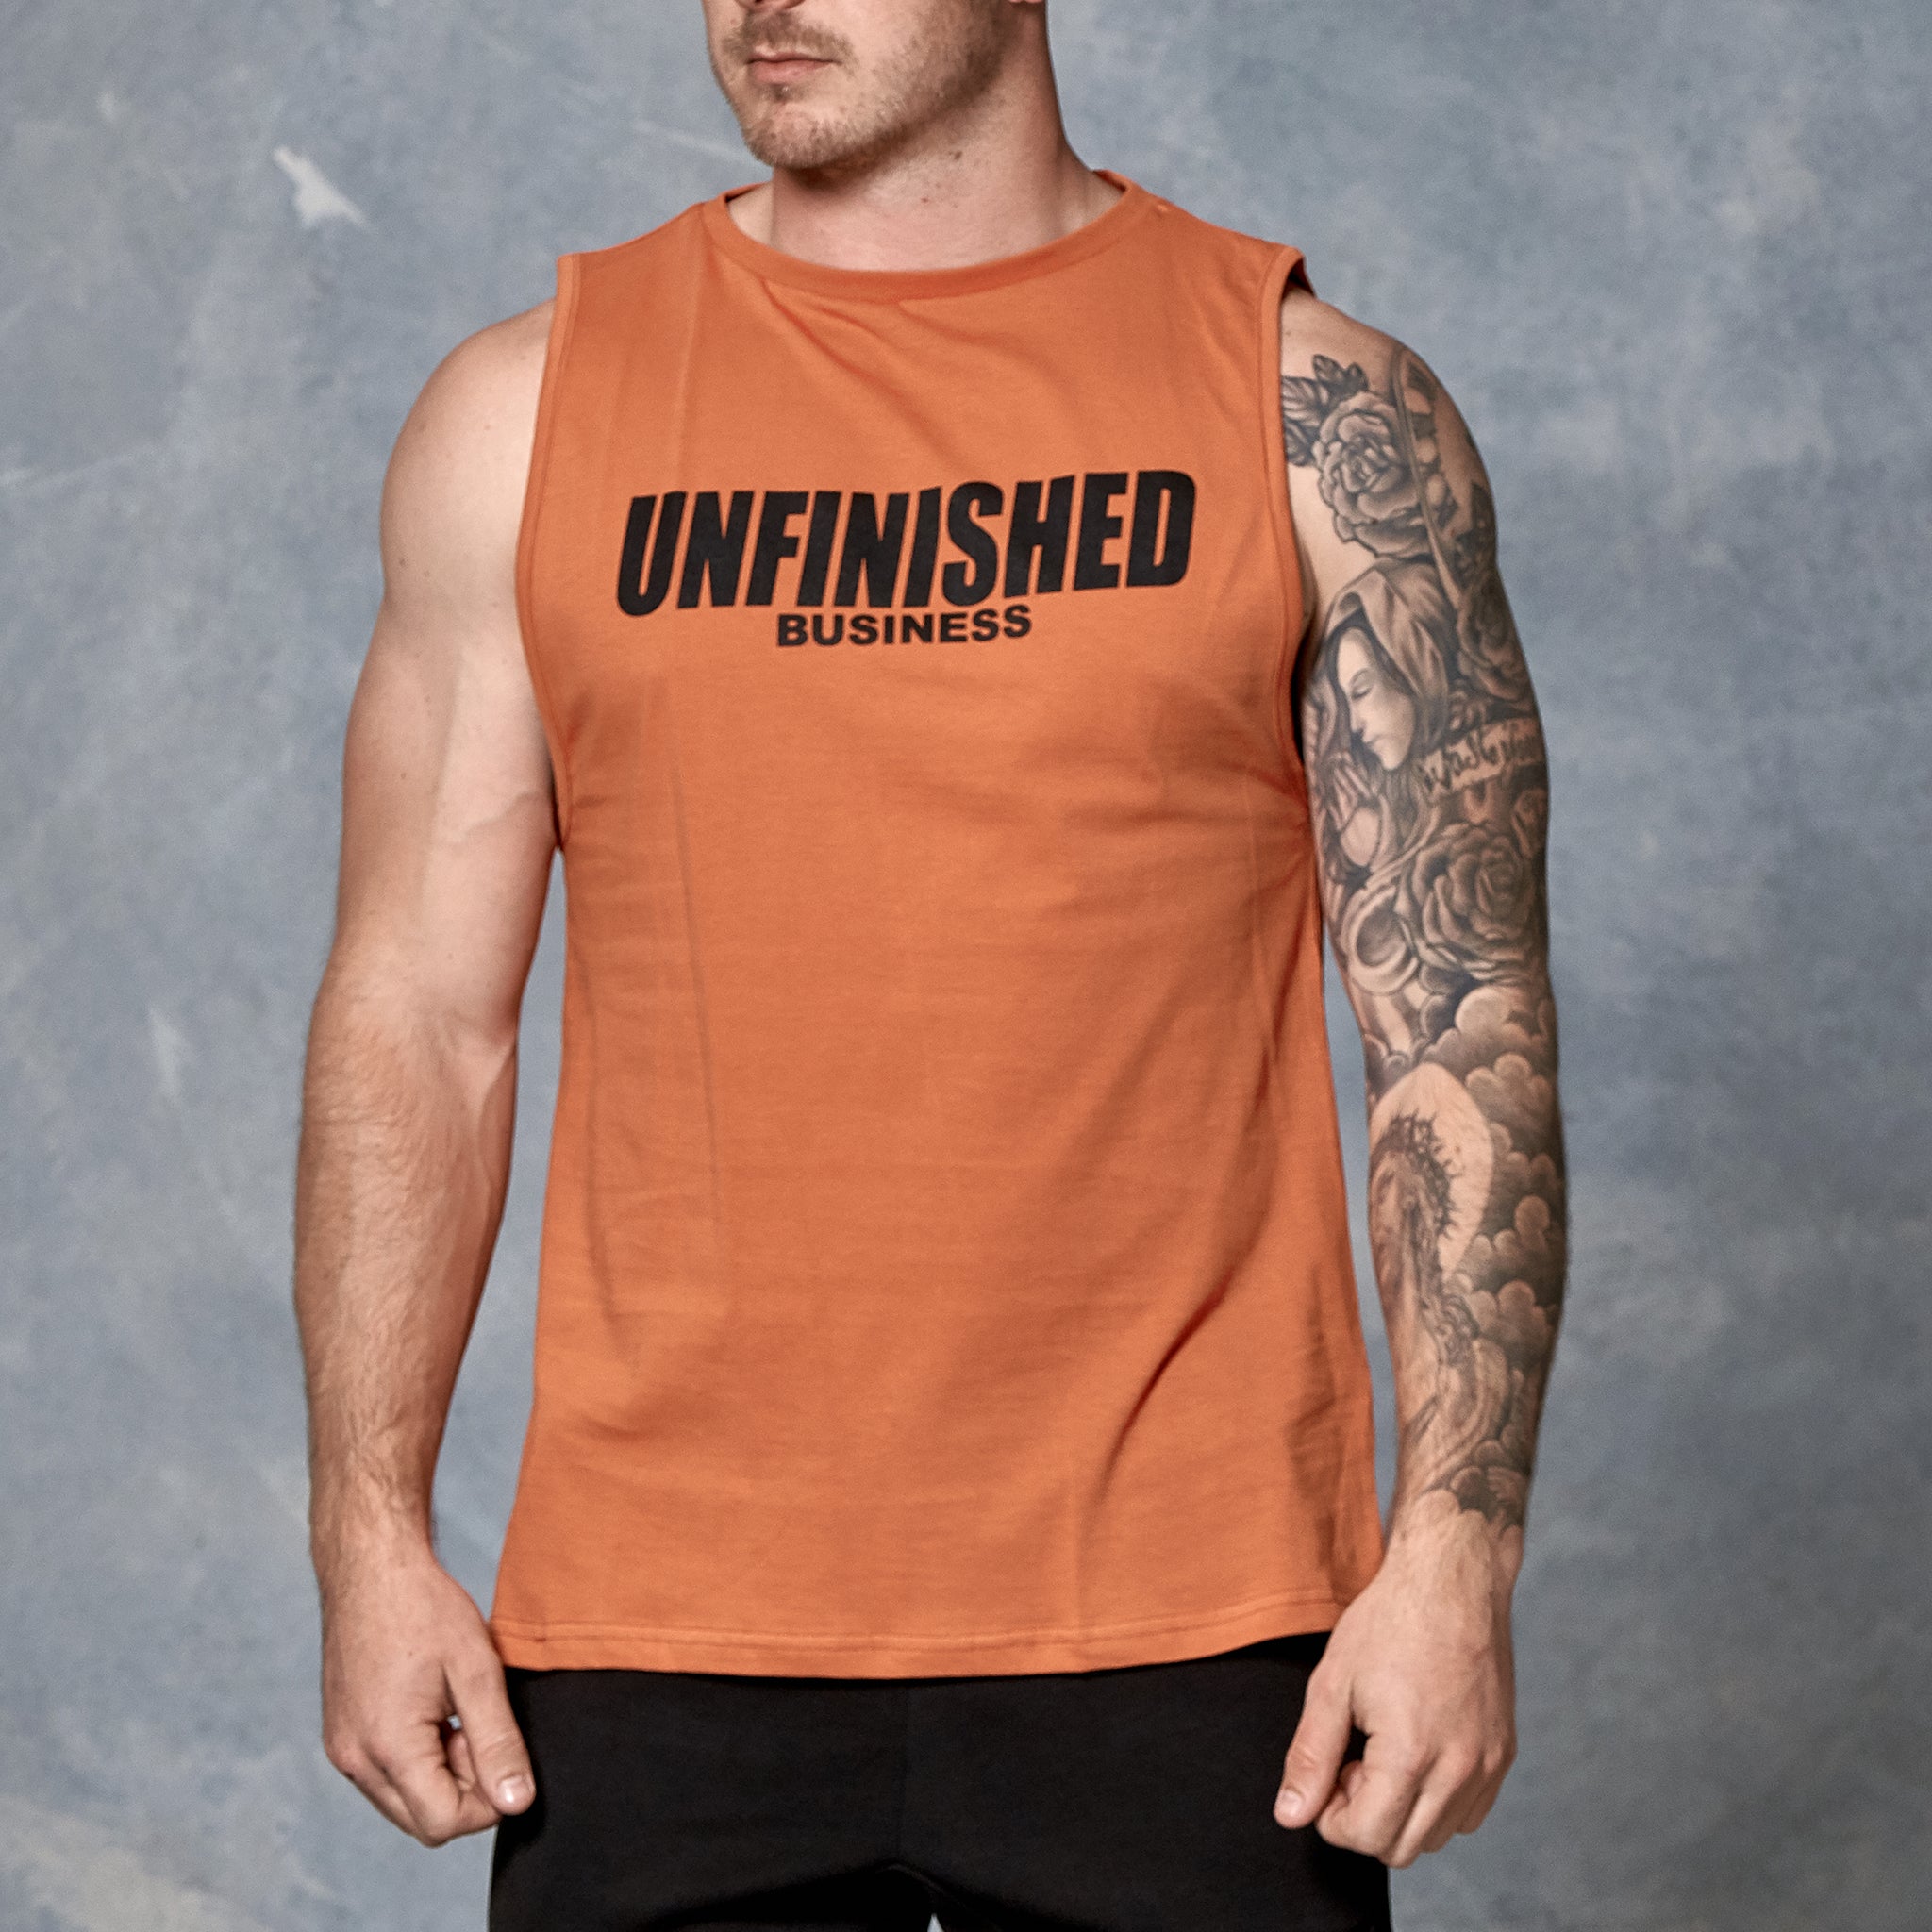 S2 Orange Unfinished Business Muscle Tank